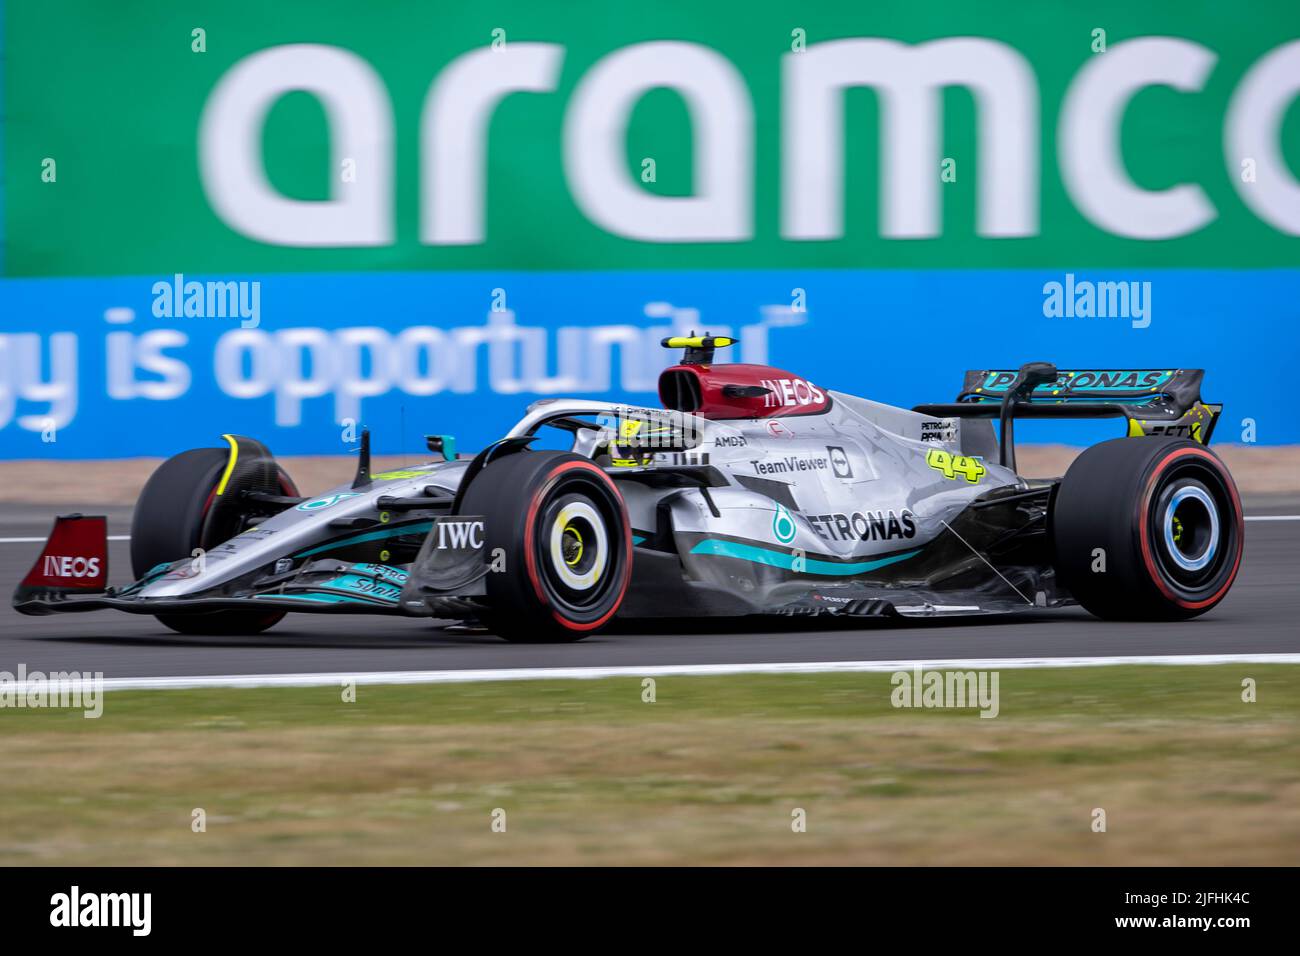 Silverstone, UK. 3rd July 2022,  Silverstone Circuit, Silverstone, Northamptonshire, England: British F1 Grand Prix, Race day: Mercedes-AMG Petronas F1 Team driver Lewis Hamilton in his Mercedes F1 W13 Credit: Action Plus Sports Images/Alamy Live News Stock Photo